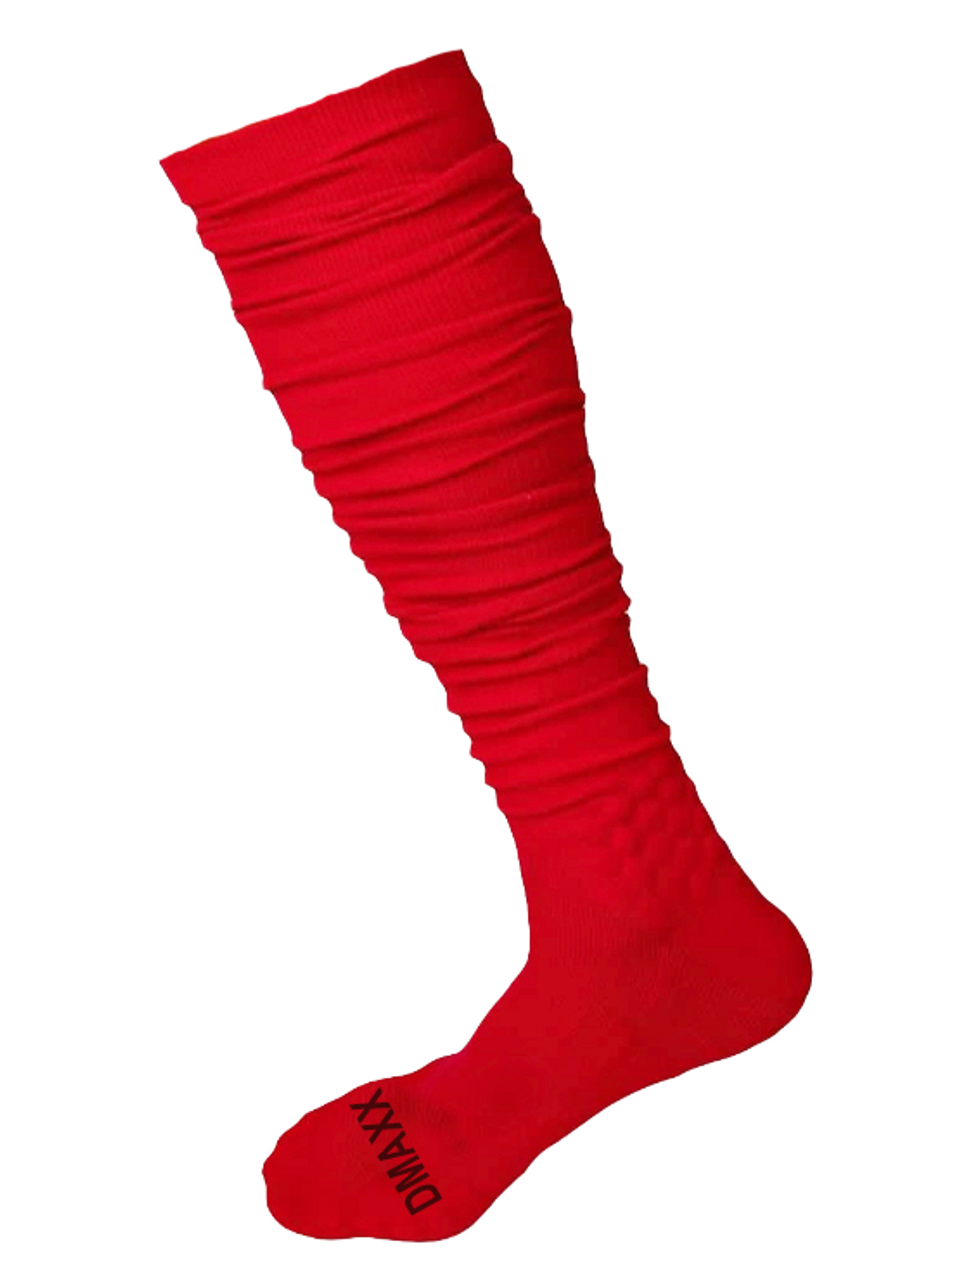 RED - OBJ Padded - EXTRA Long Scrunchie  Socks  - See Product Video